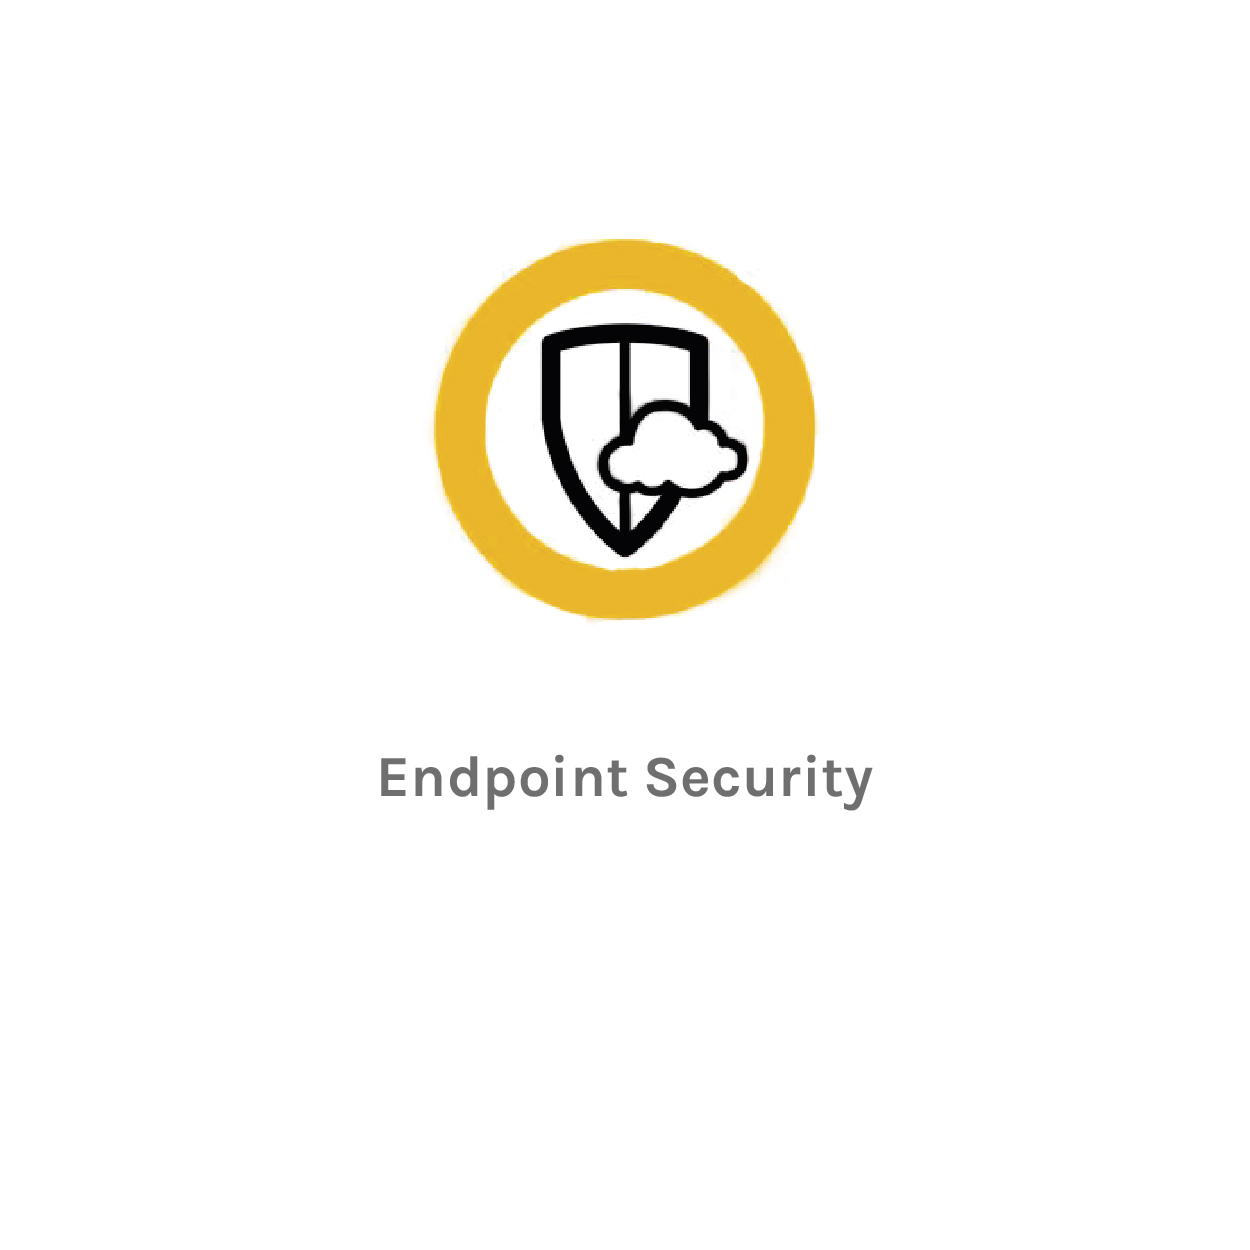 endpointsecurity-01.jpg